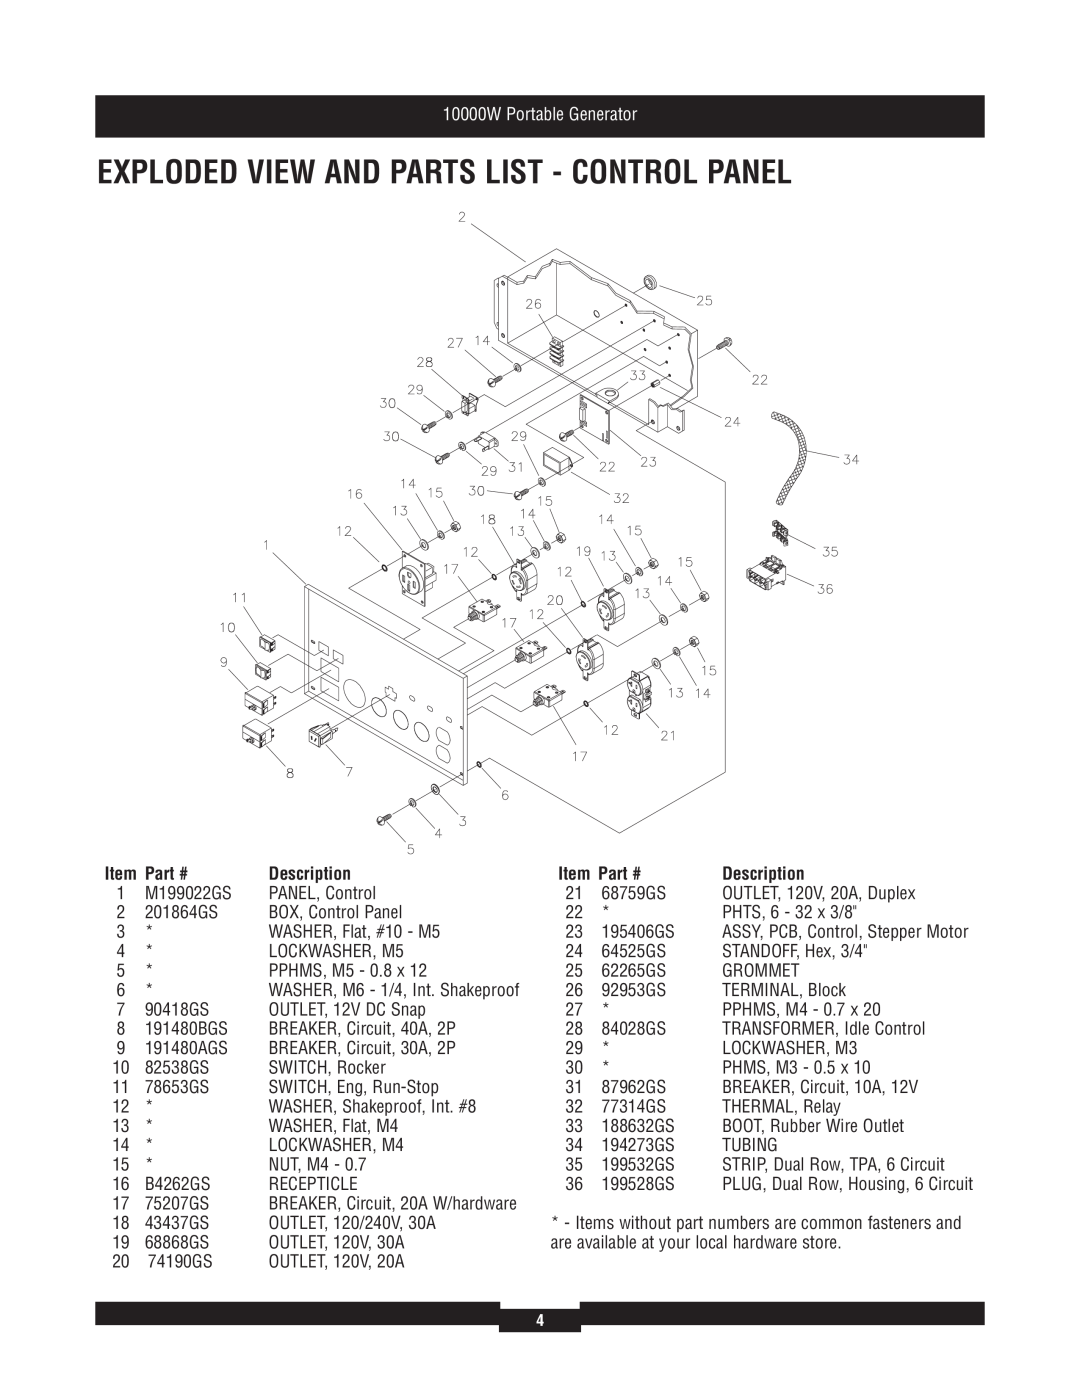 Briggs & Stratton 030384 manual Exploded View And Parts List - Control Panel, Description, 10000W Portable Generator 